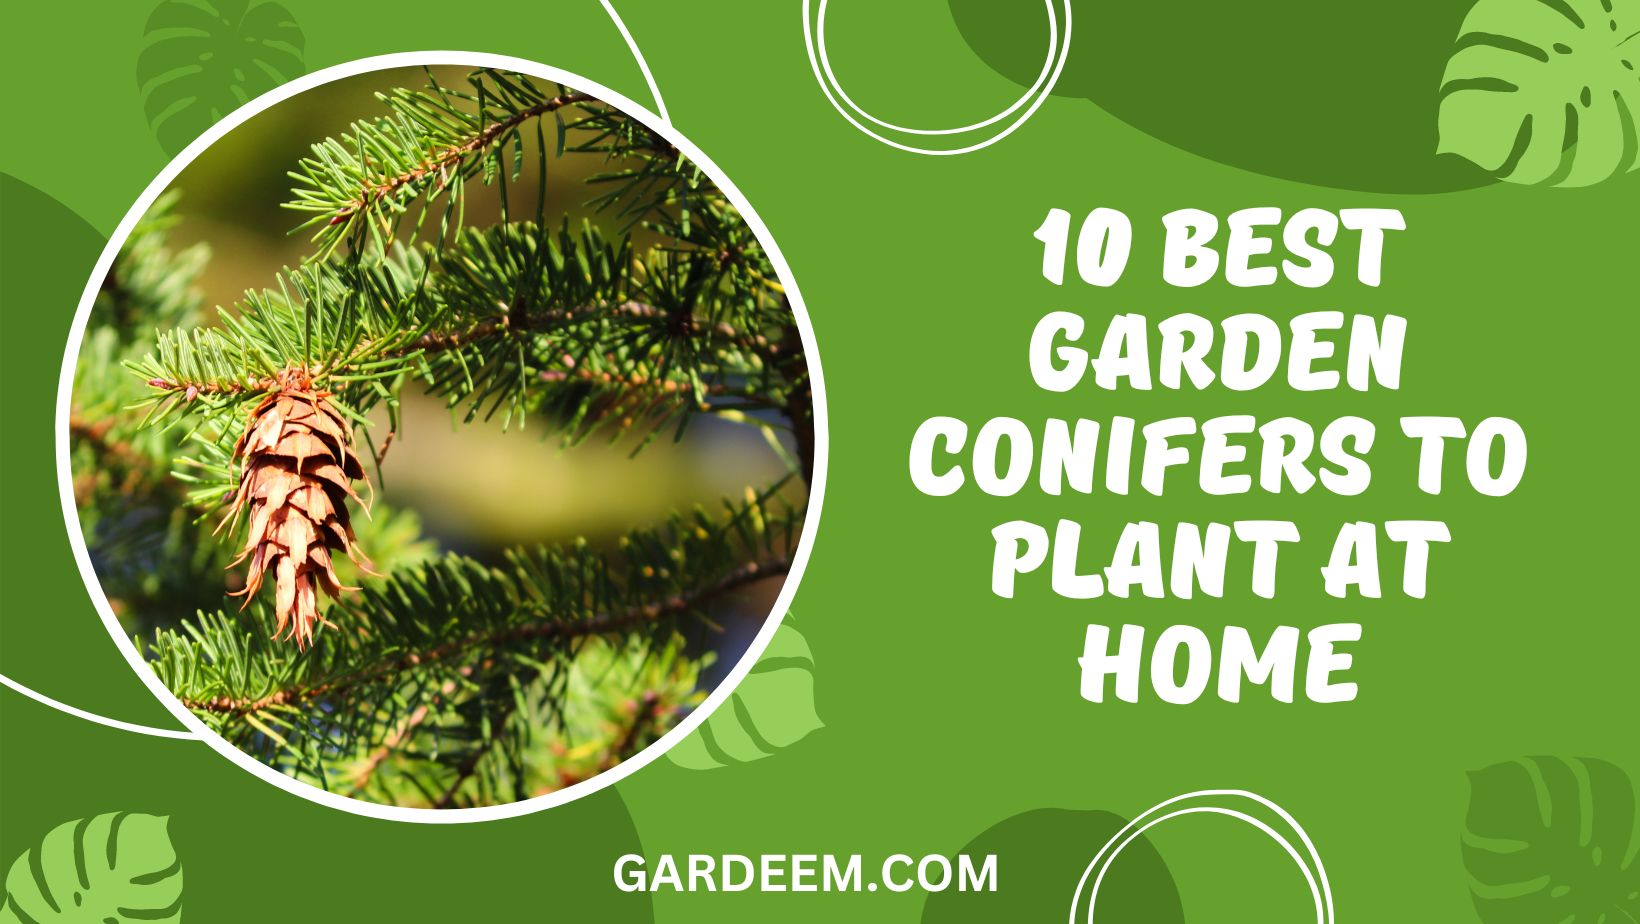 10 Best Garden Conifers To Plant At Home